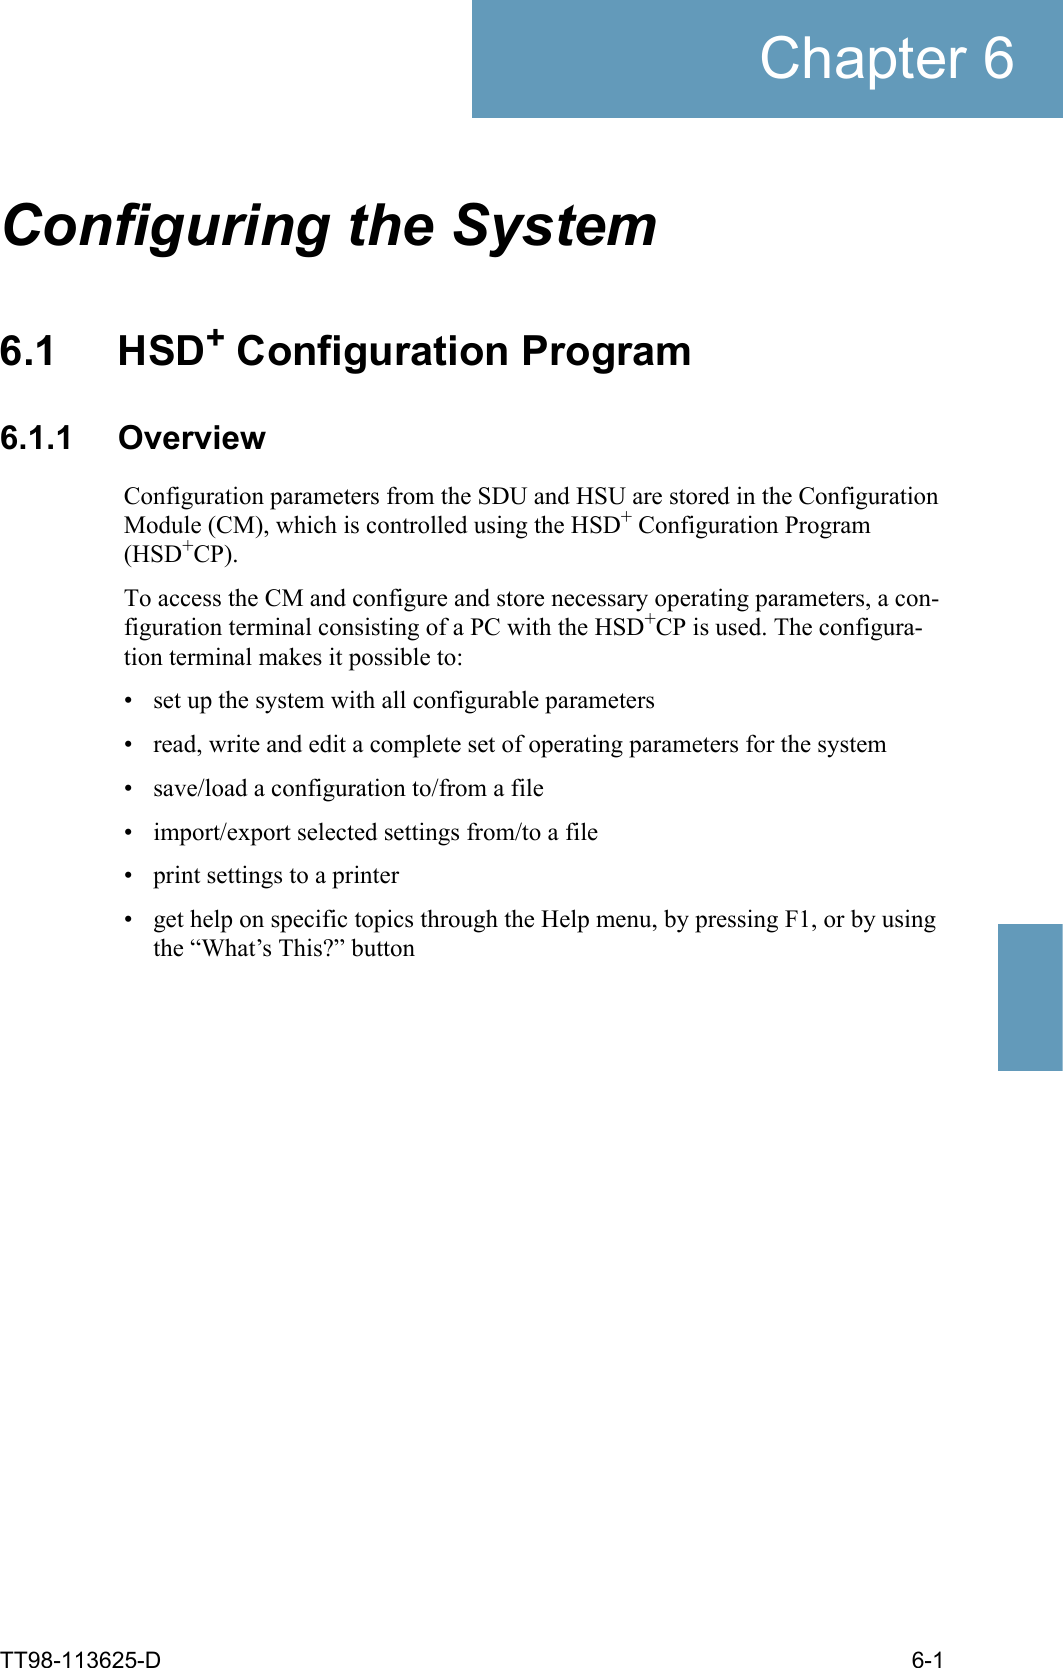 TT98-113625-D 6-1Chapter 66666Configuring the System 66.1 HSD+ Configuration Program6.1.1 OverviewConfiguration parameters from the SDU and HSU are stored in the Configuration Module (CM), which is controlled using the HSD+ Configuration Program (HSD+CP).To access the CM and configure and store necessary operating parameters, a con-figuration terminal consisting of a PC with the HSD+CP is used. The configura-tion terminal makes it possible to:• set up the system with all configurable parameters• read, write and edit a complete set of operating parameters for the system• save/load a configuration to/from a file• import/export selected settings from/to a file• print settings to a printer• get help on specific topics through the Help menu, by pressing F1, or by using the “What’s This?” button